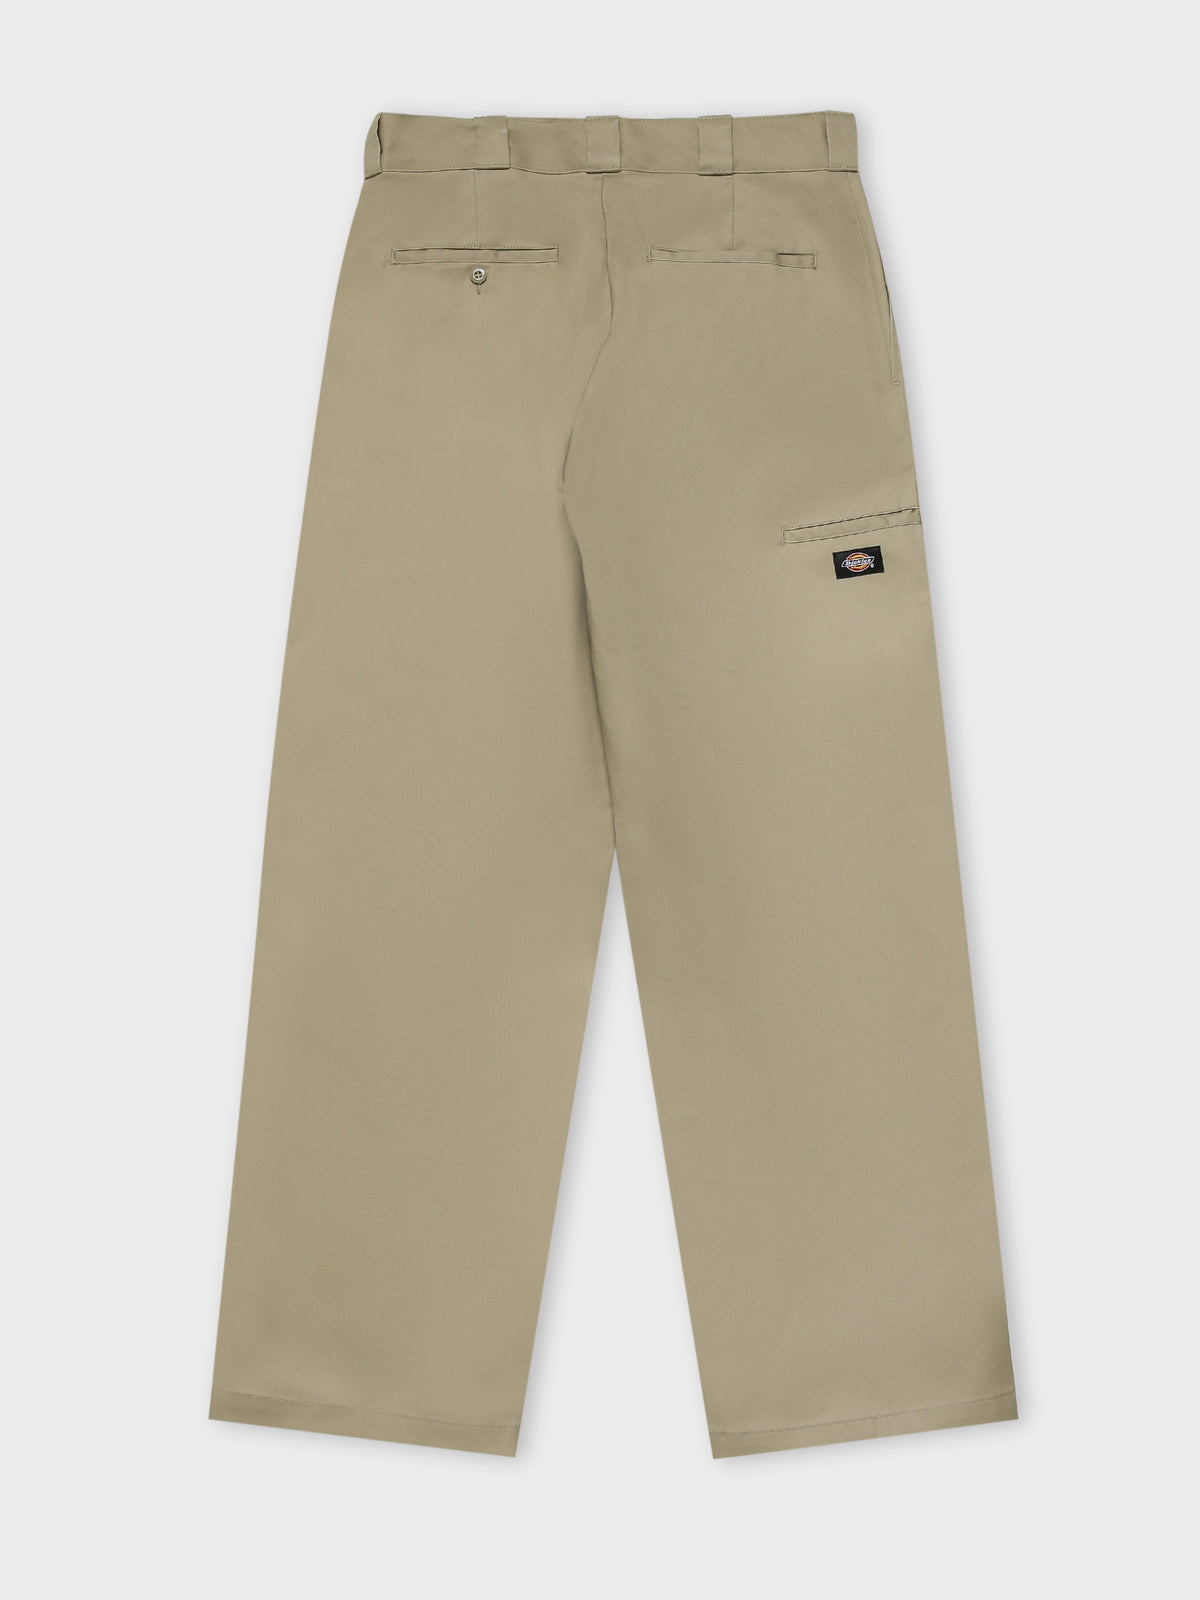 85-283 Loose Fit Double Knee Pants in Khaki